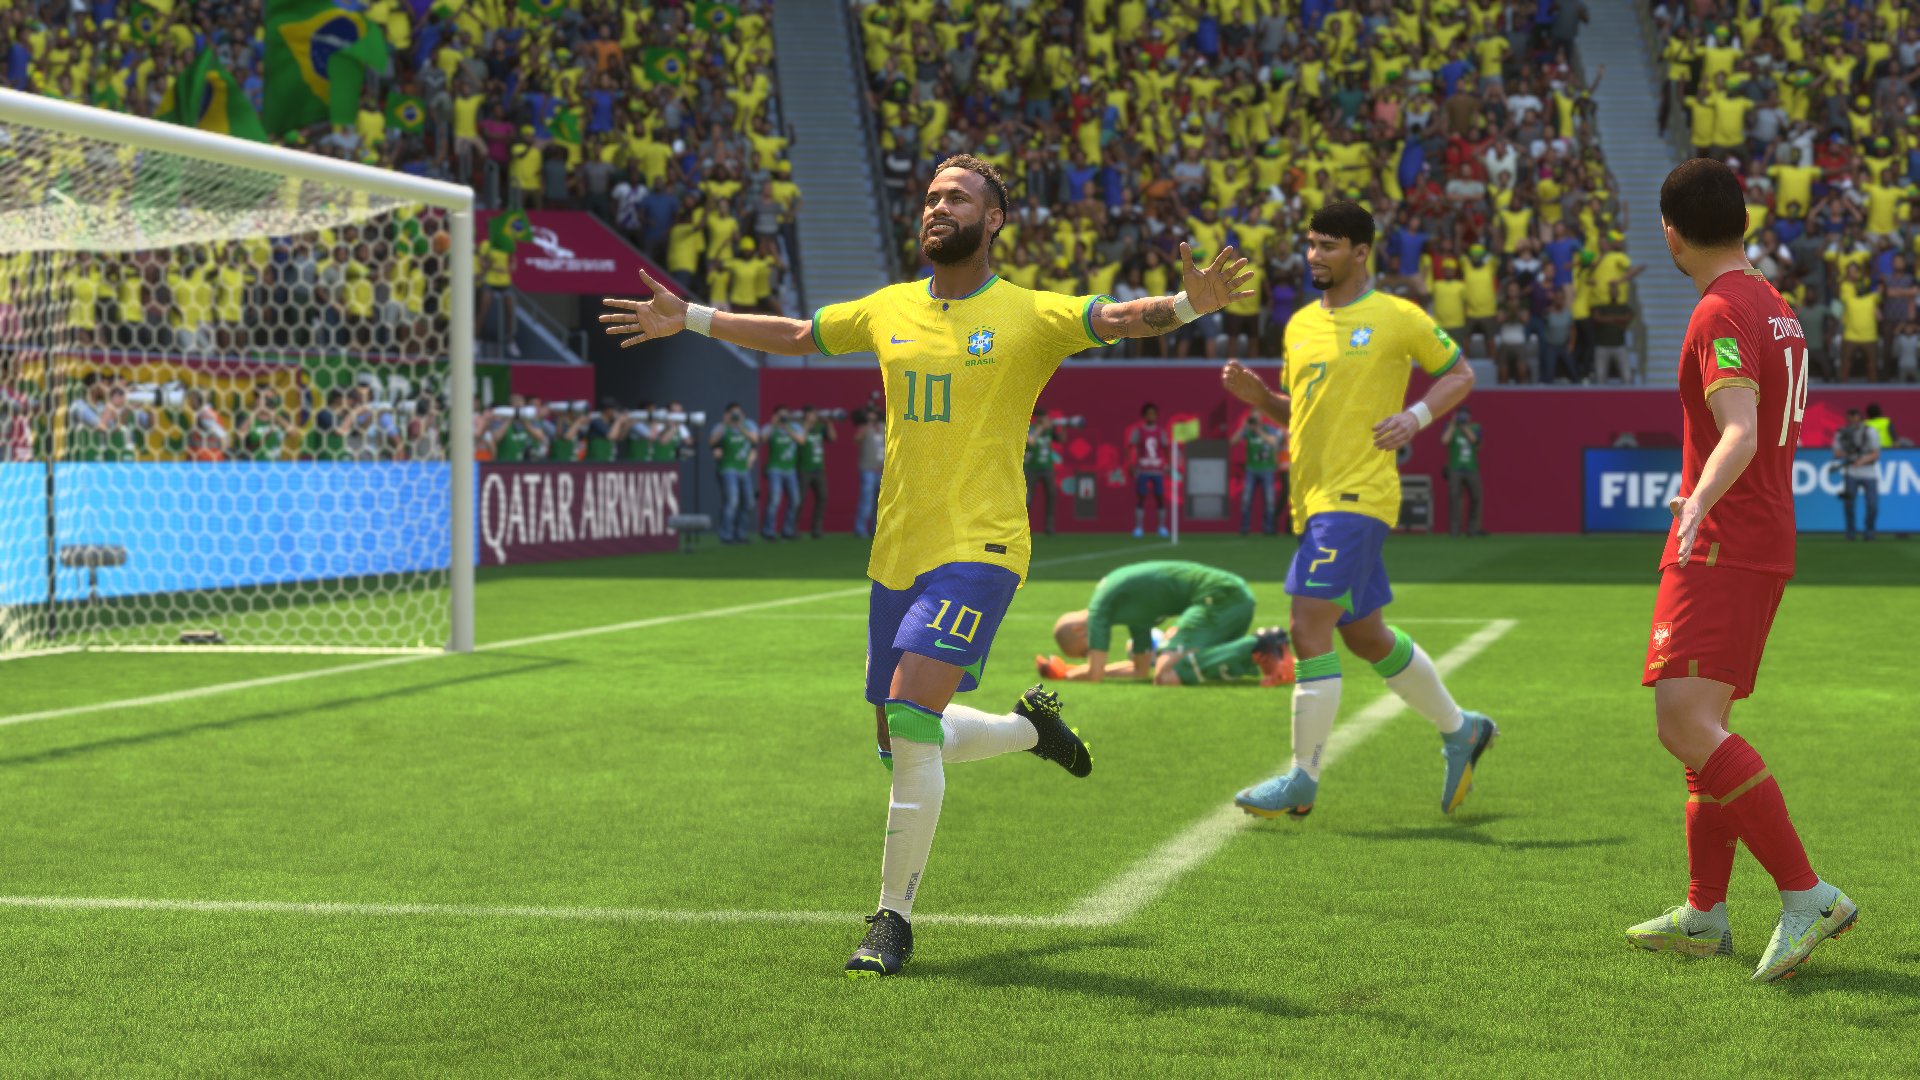 FIFA 18 World Cup Update Available Now